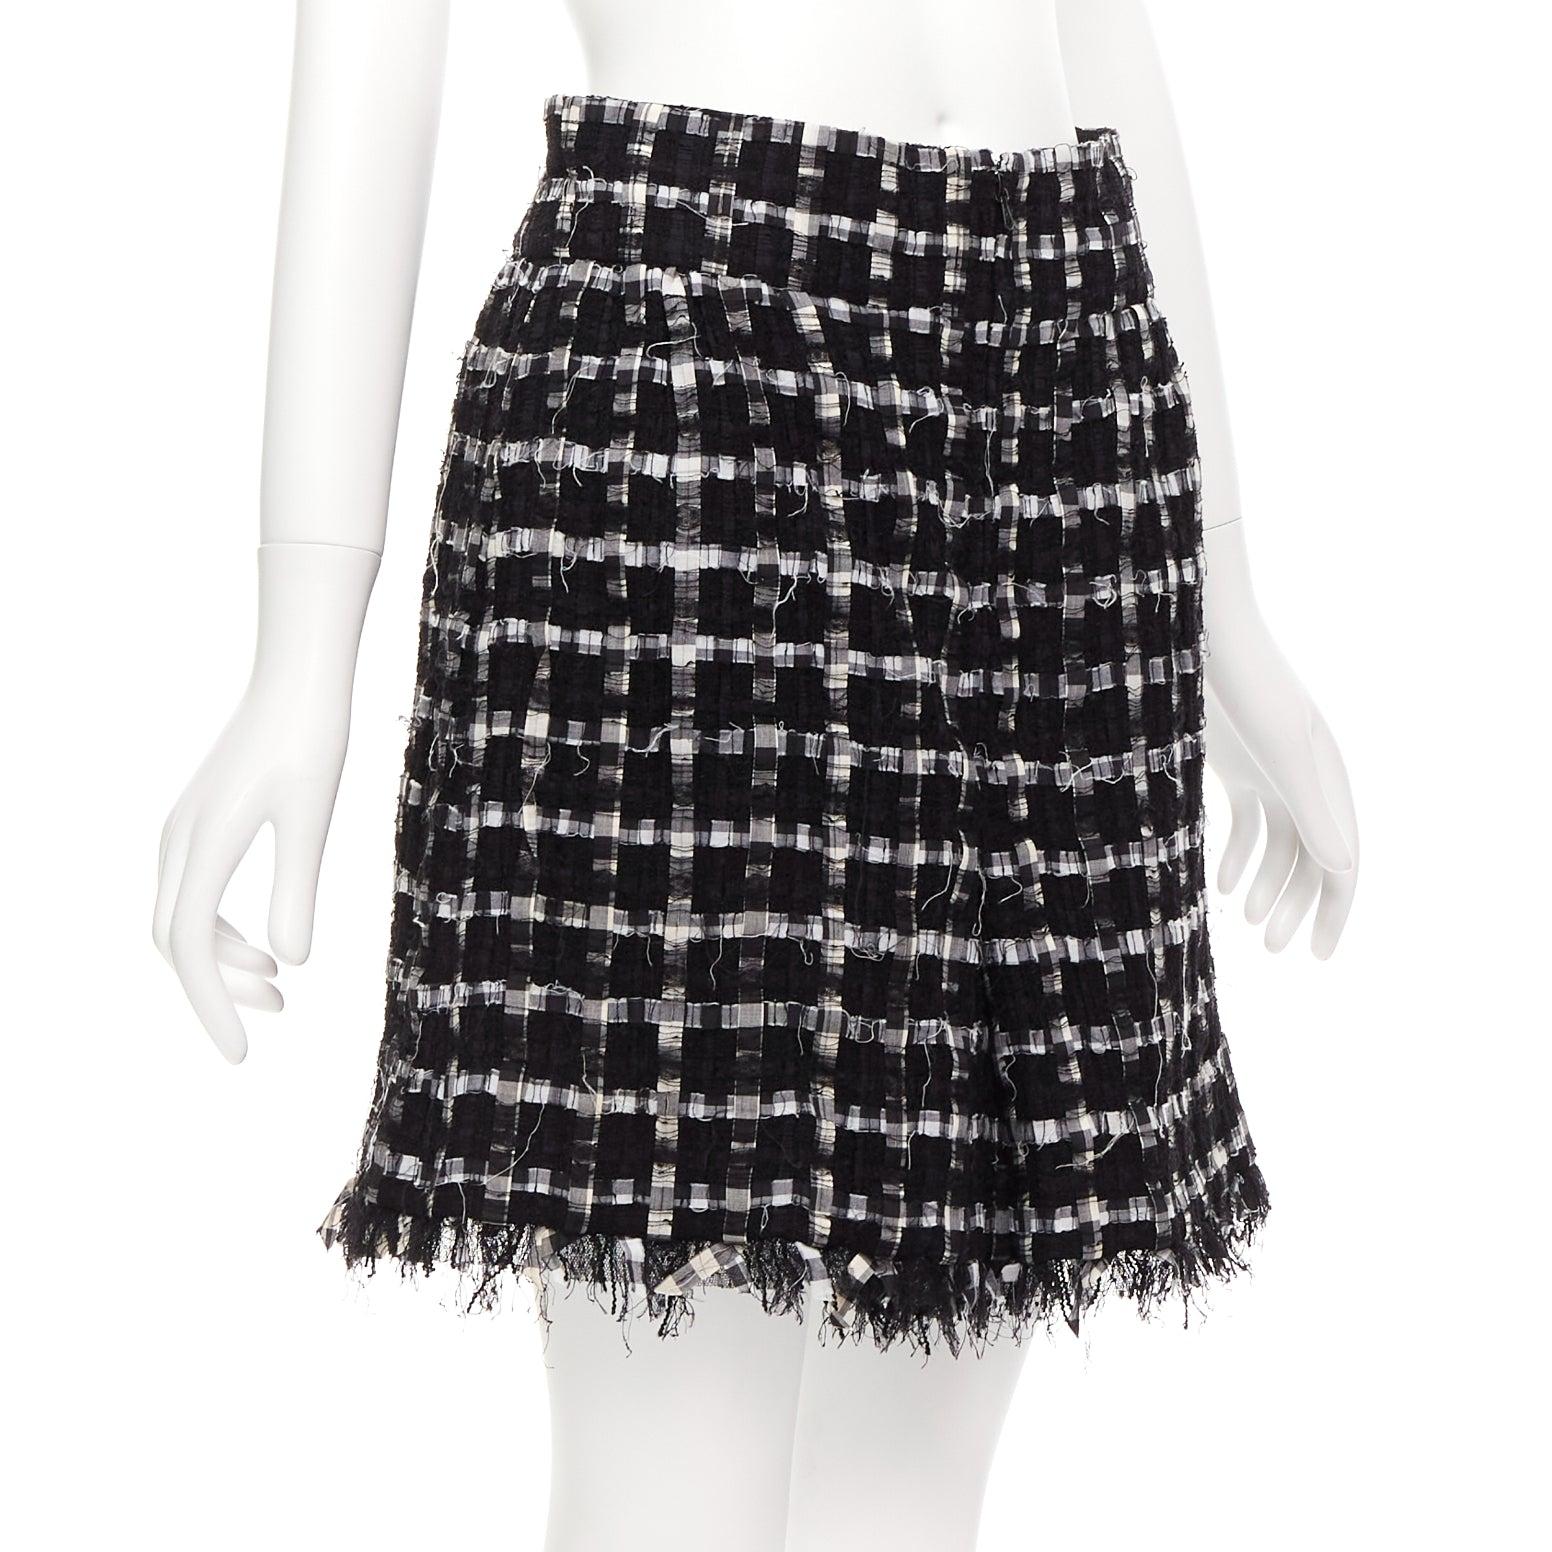 CHANEL black white check raw edge tweed silk lined skirt FR40 L
Reference: CNLE/A00259
Brand: Chanel
Designer: Karl Lagerfeld
Material: Polyamide, Blend
Color: White, Black
Pattern: Tweed
Closure: Zip
Lining: Black Silk
Extra Details: Front zip.